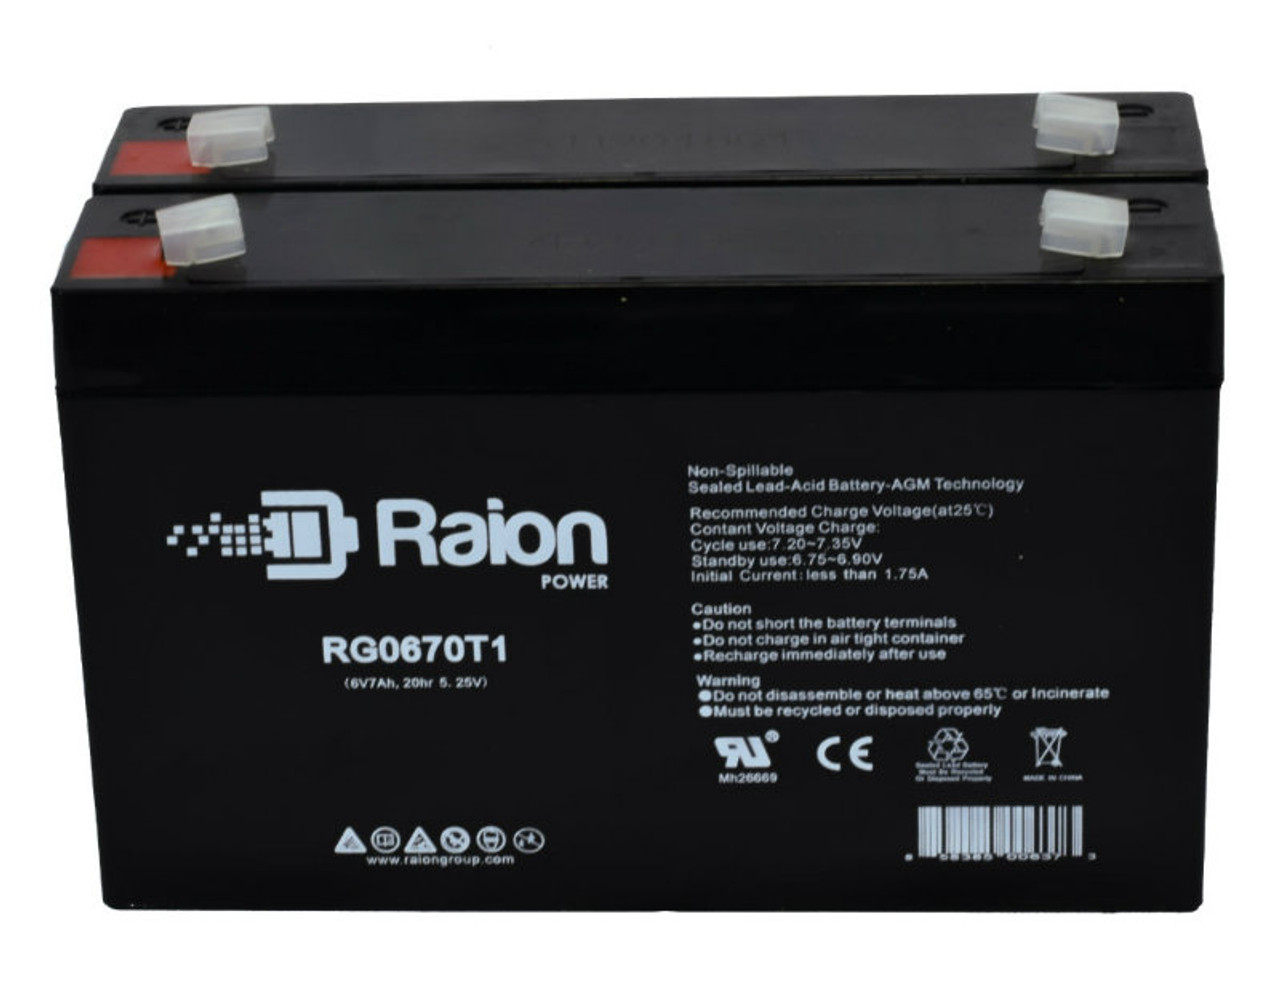 Raion Power RG0670T1 6V 7Ah Replacement Battery for Pace Tech Vitalmax Systems 4 - 2 Pack